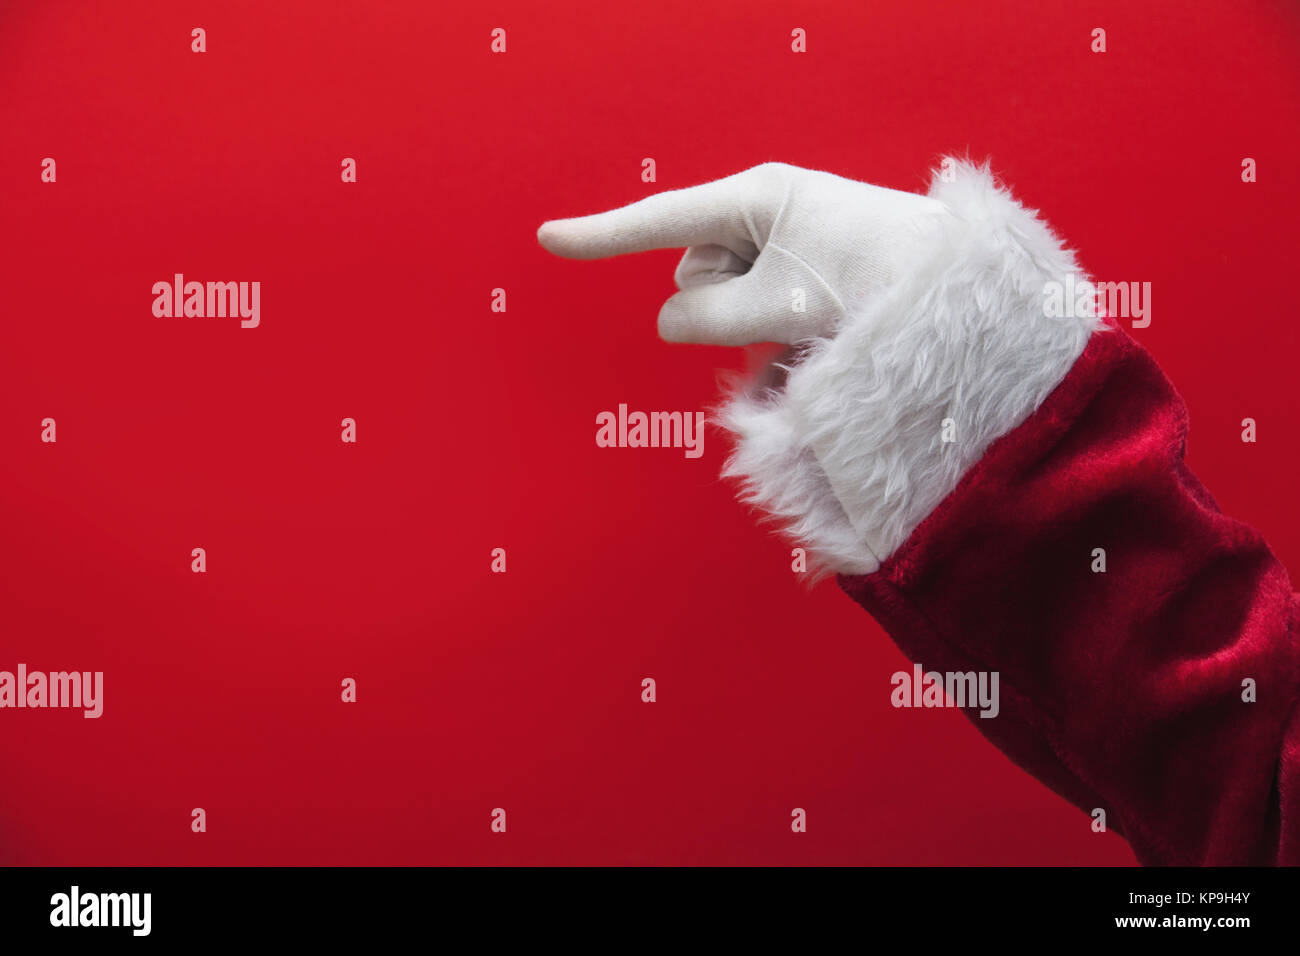 Santa Claus hand pointing finger against a red background Stock Photo